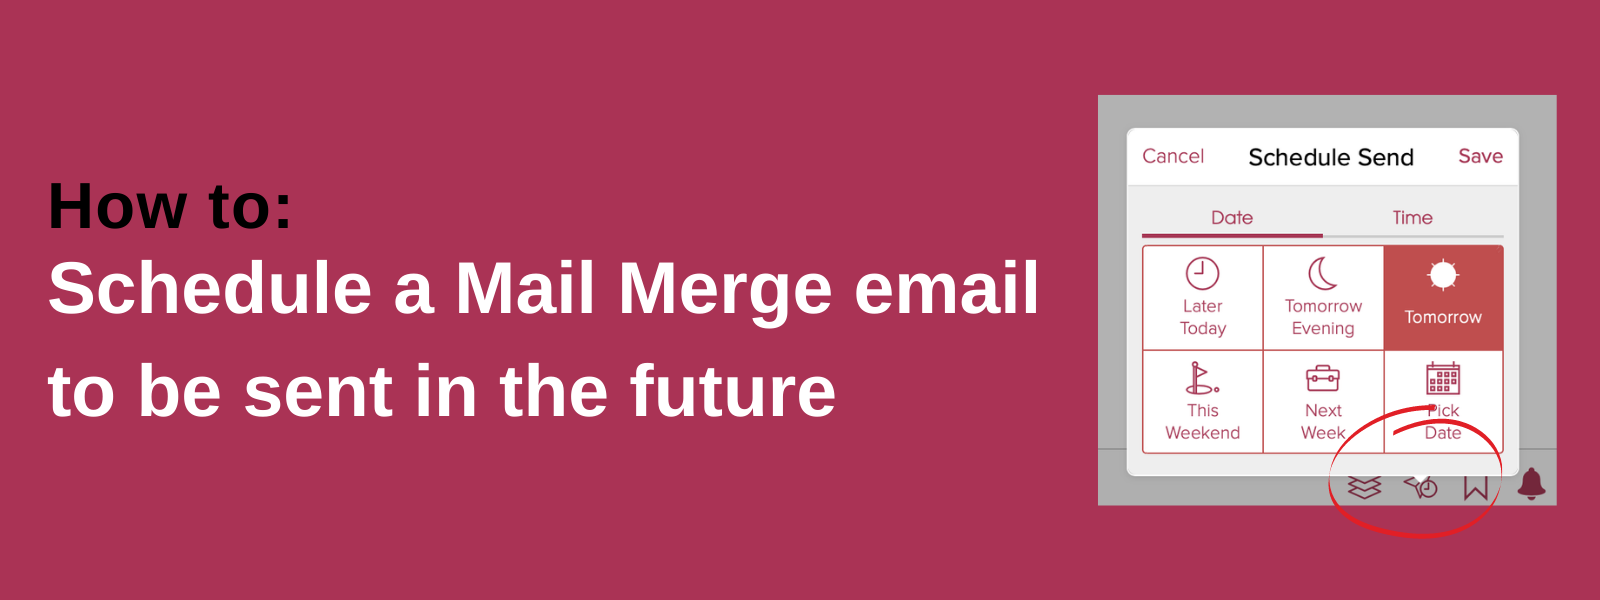 How to schedule a Mail Merge email to be sent in the future.